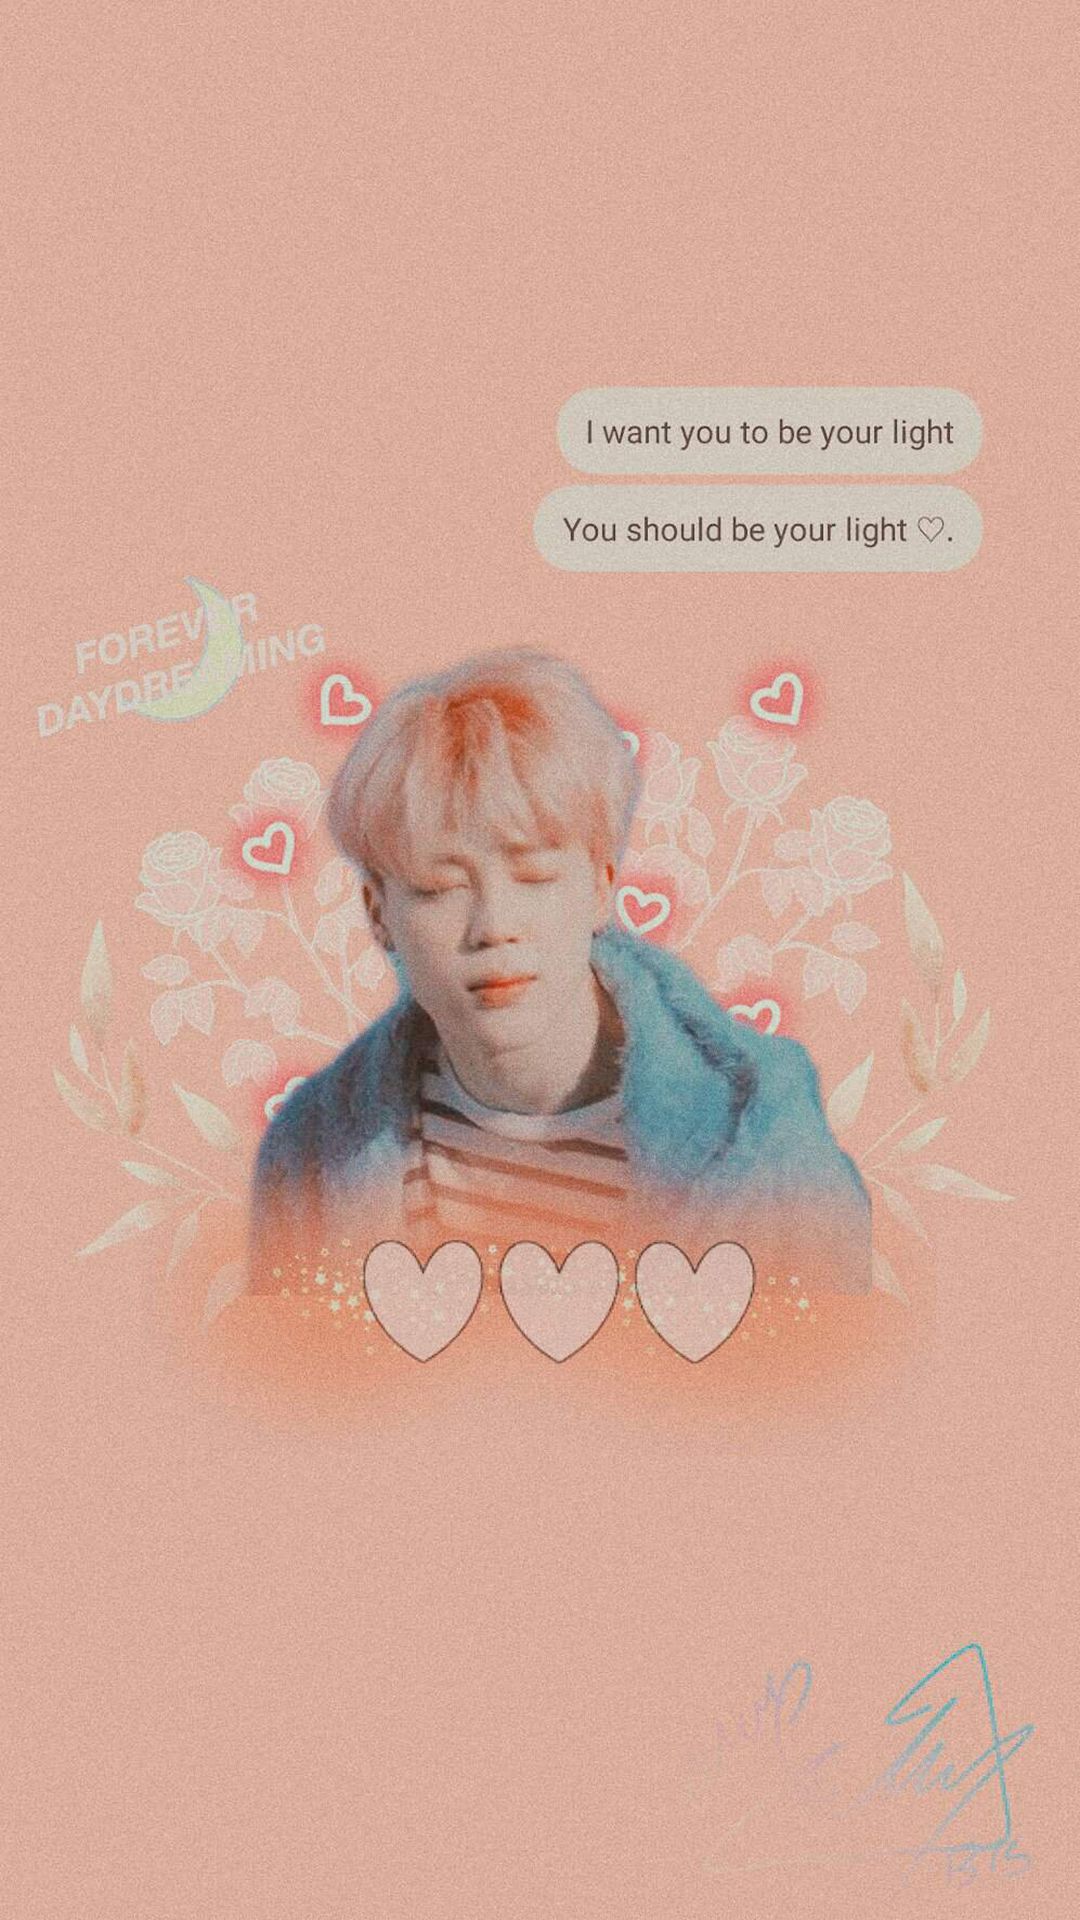 IPhone wallpaper of Jimin from BTS with a quote about wanting to be your light - Android